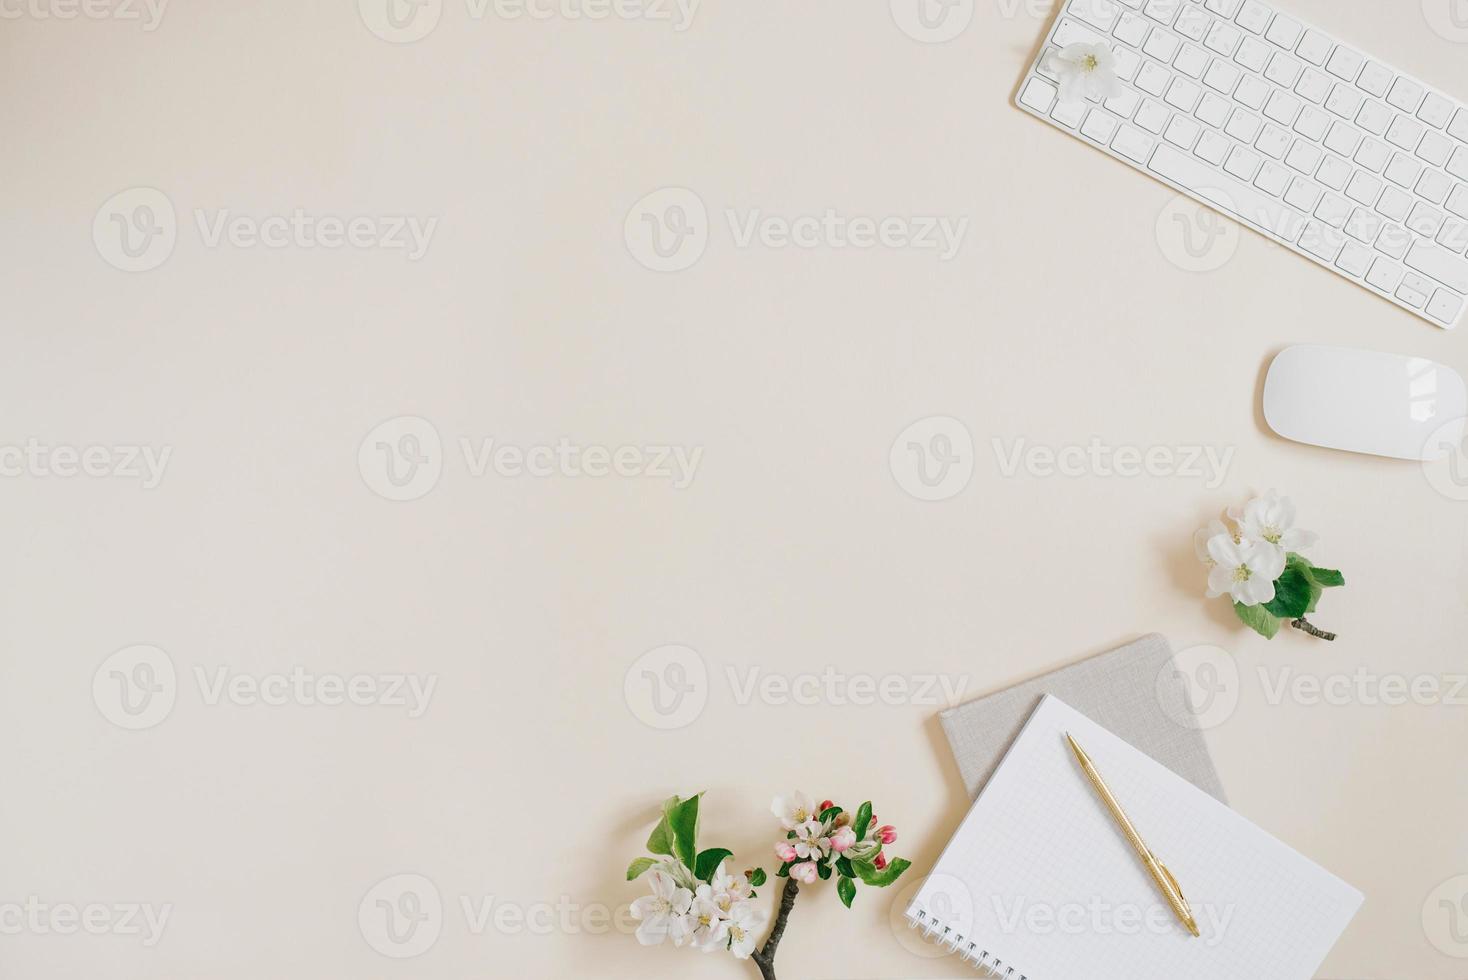 A flat scene in beige tones for a self-employed freelance girl. Planner, pen, computer and white apple flowers. Sketchy notebook or notebook mockup. photo